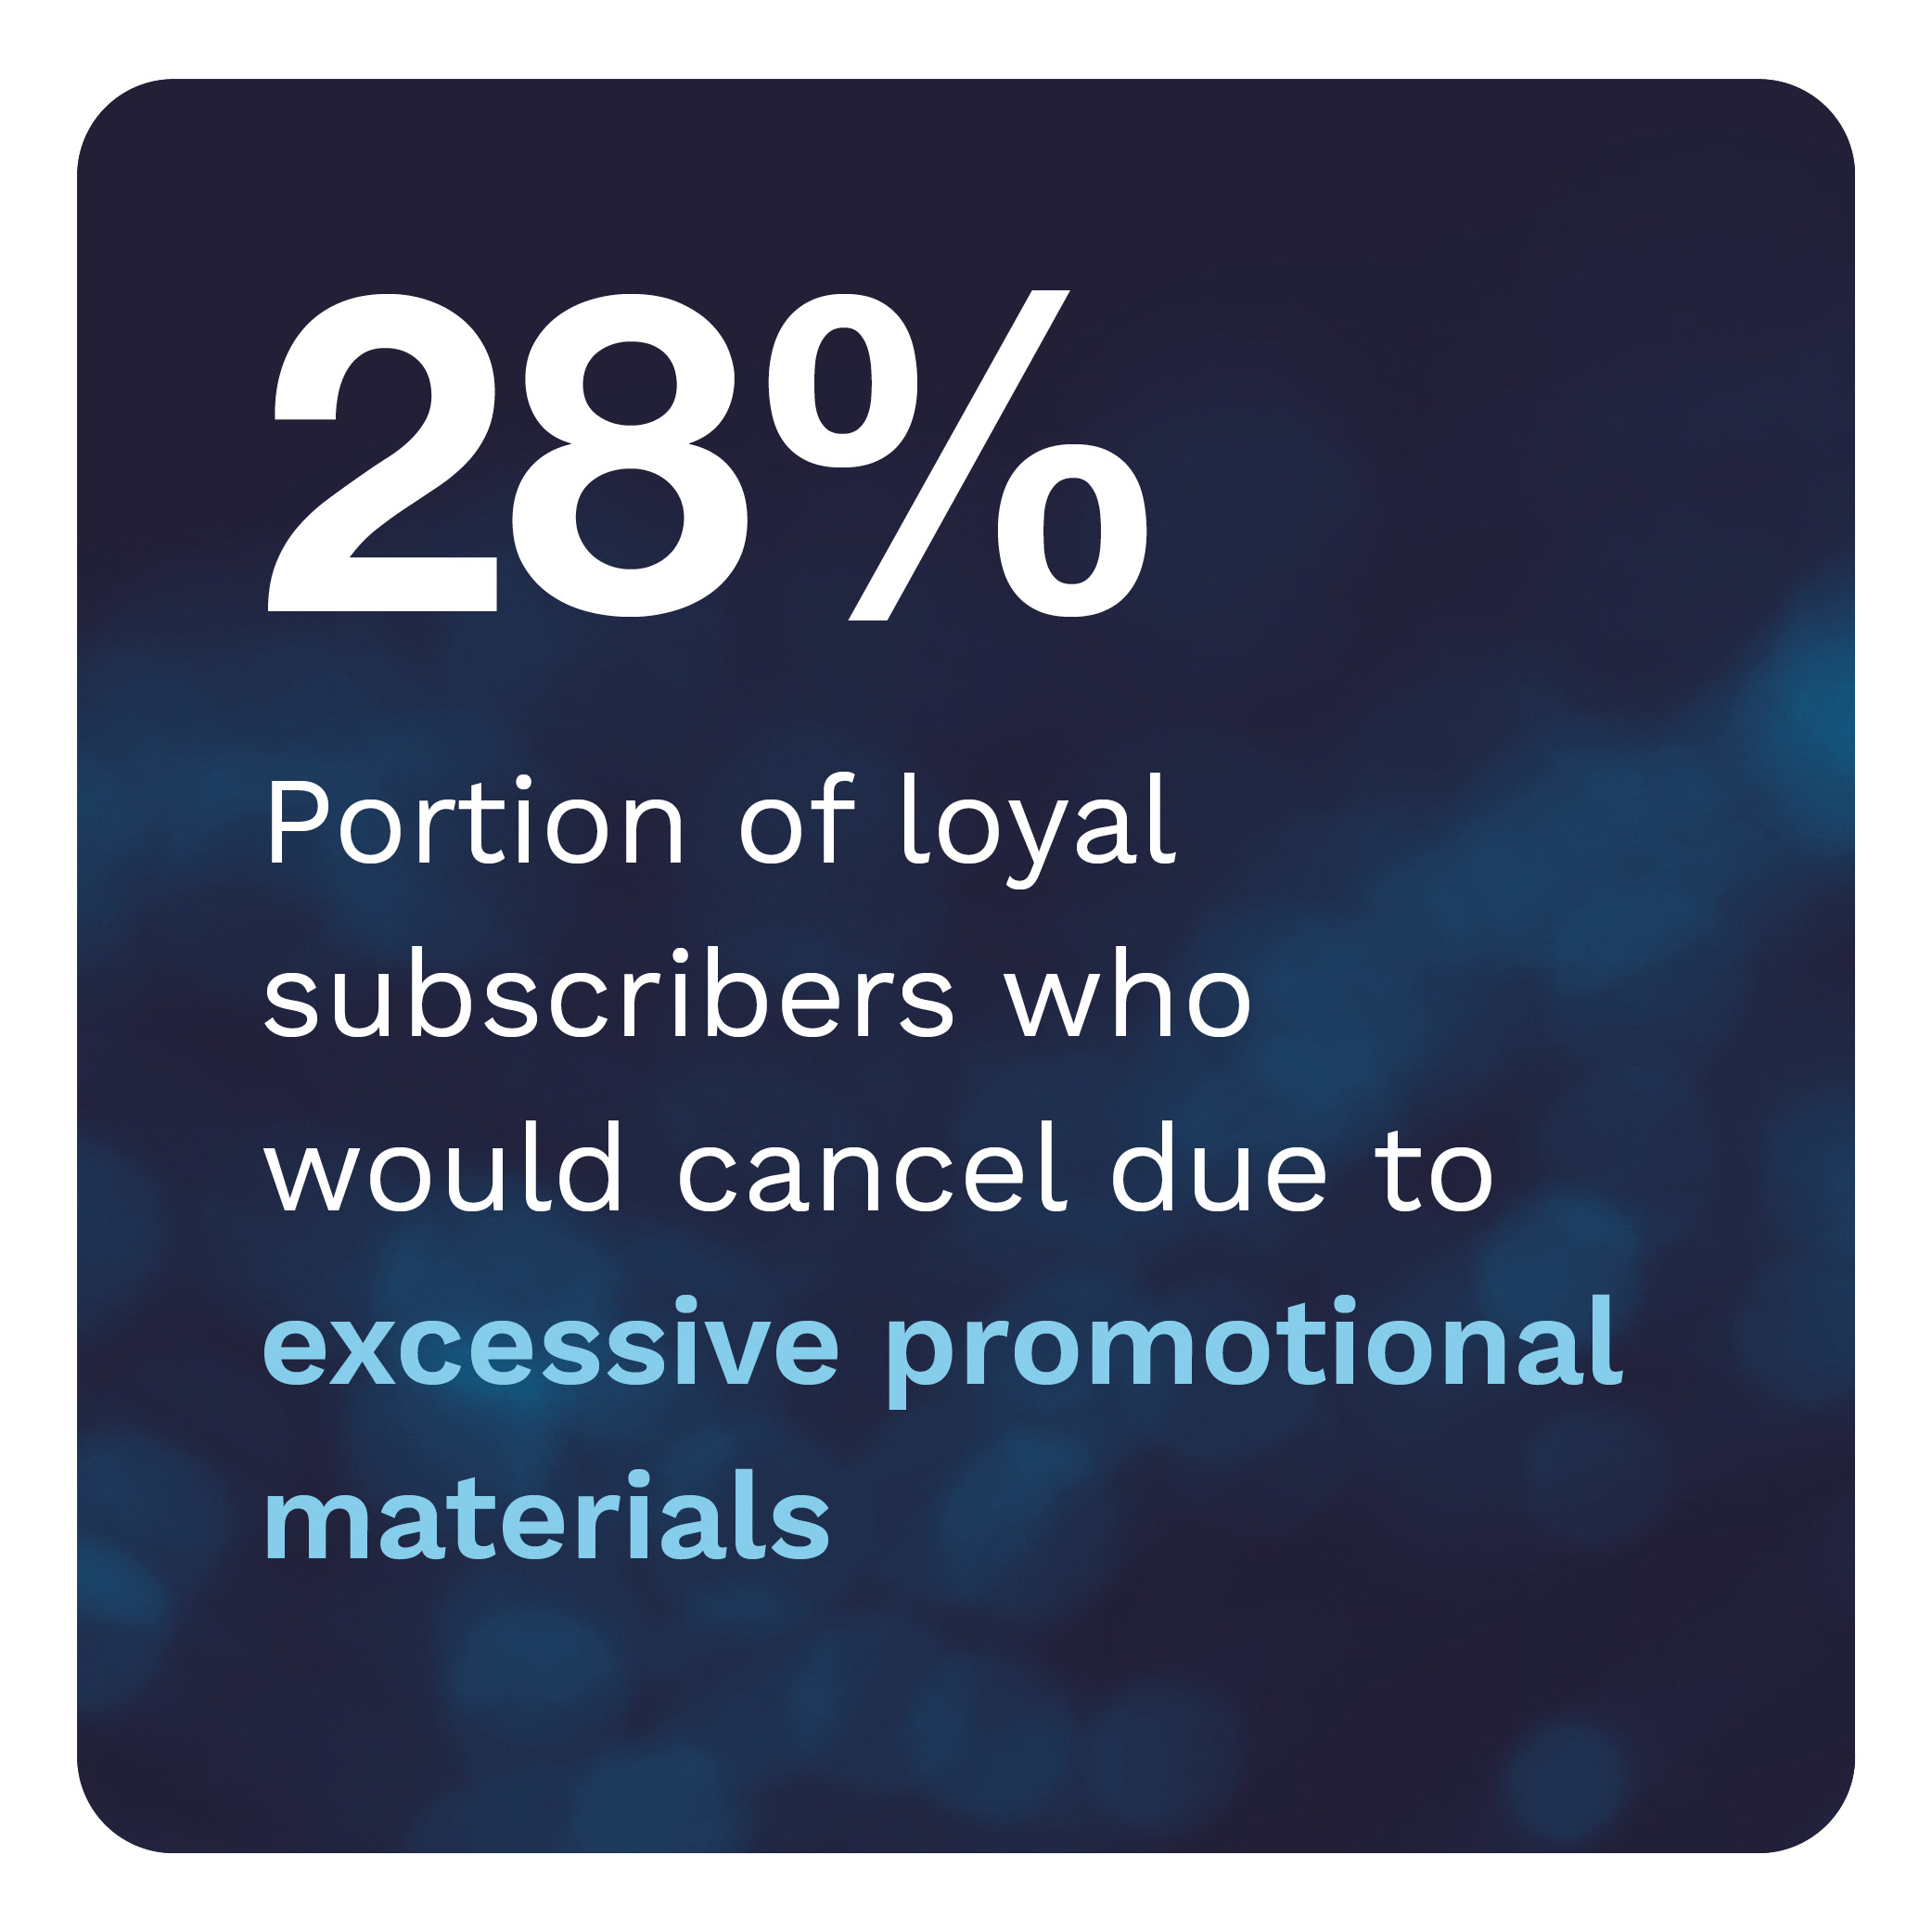 28%: Portion of loyal subscribers who would cancel due to excessive promotional materials